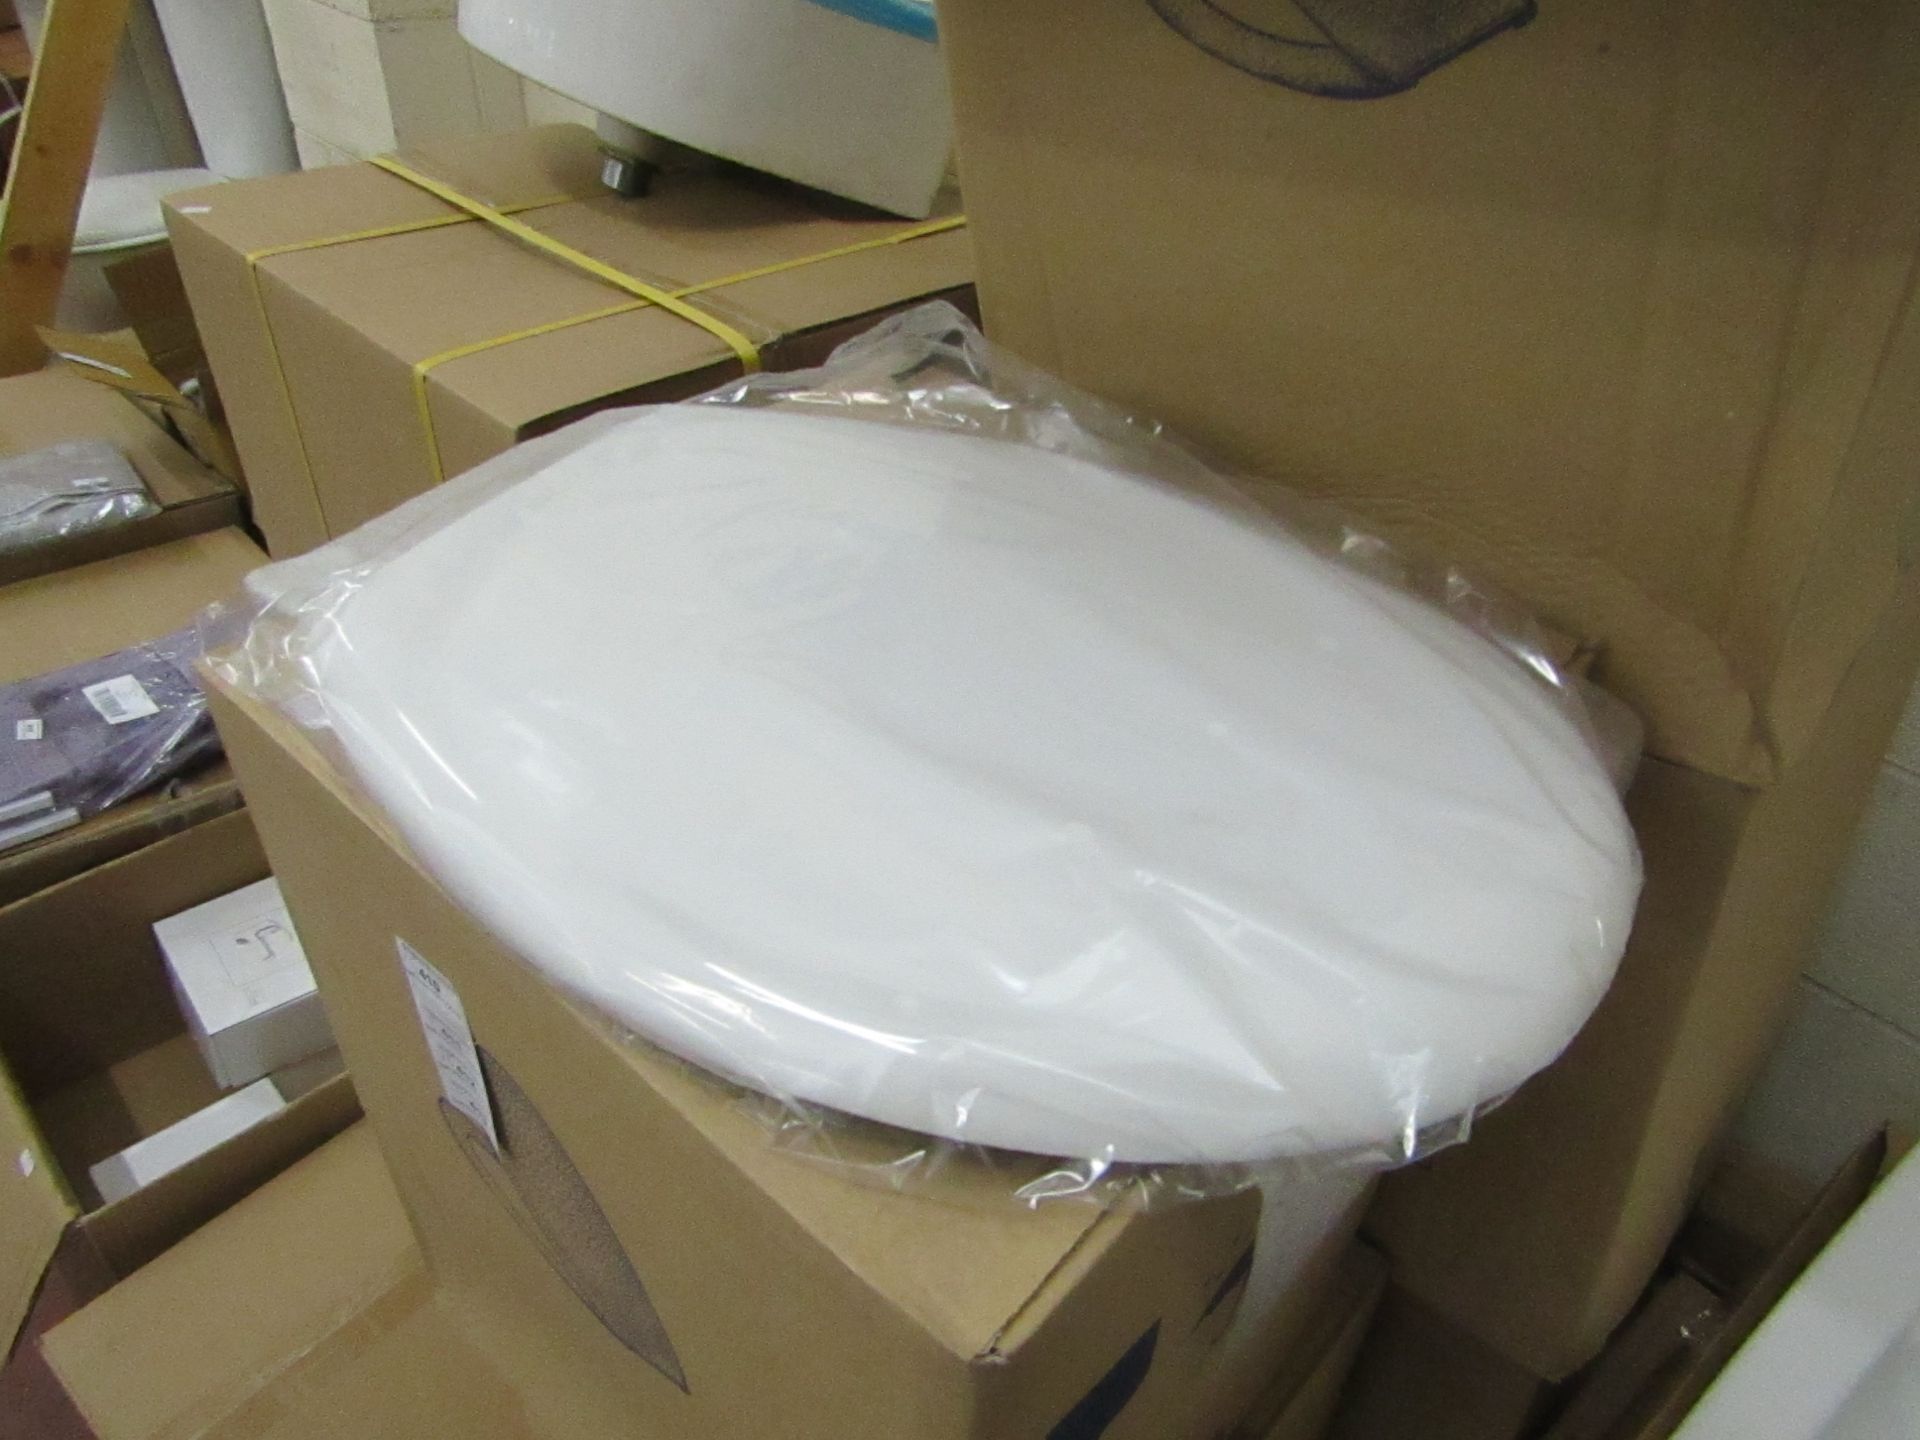 5x Unbranded Roca toilet seats, all new and packaged.